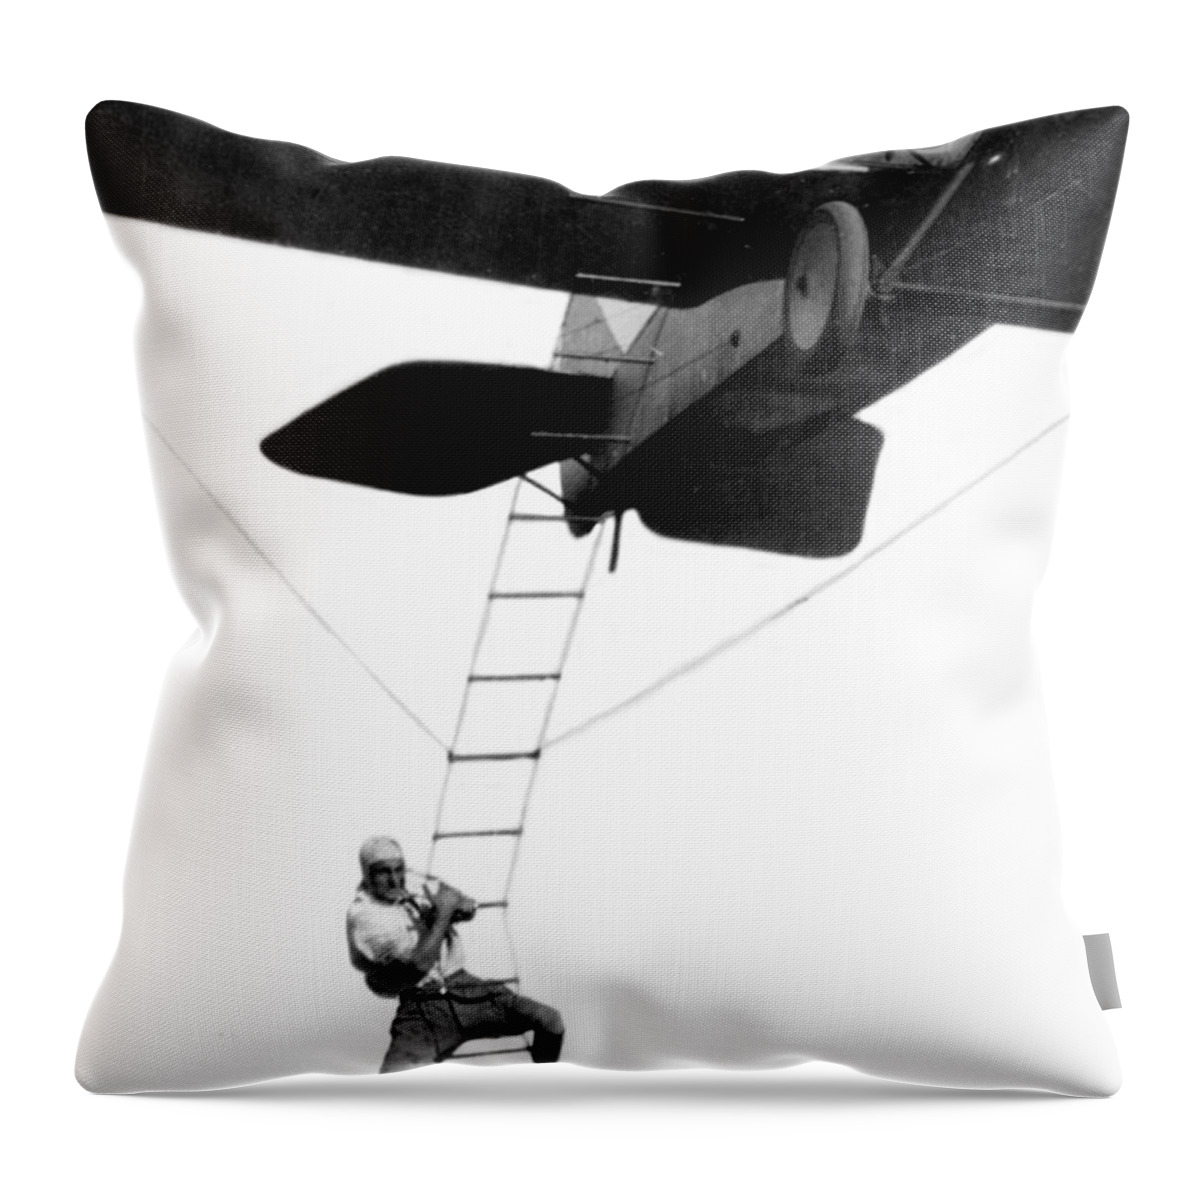 Entertainment Throw Pillow featuring the photograph Fearless Freddie Hollywood Stuntman by Science Source